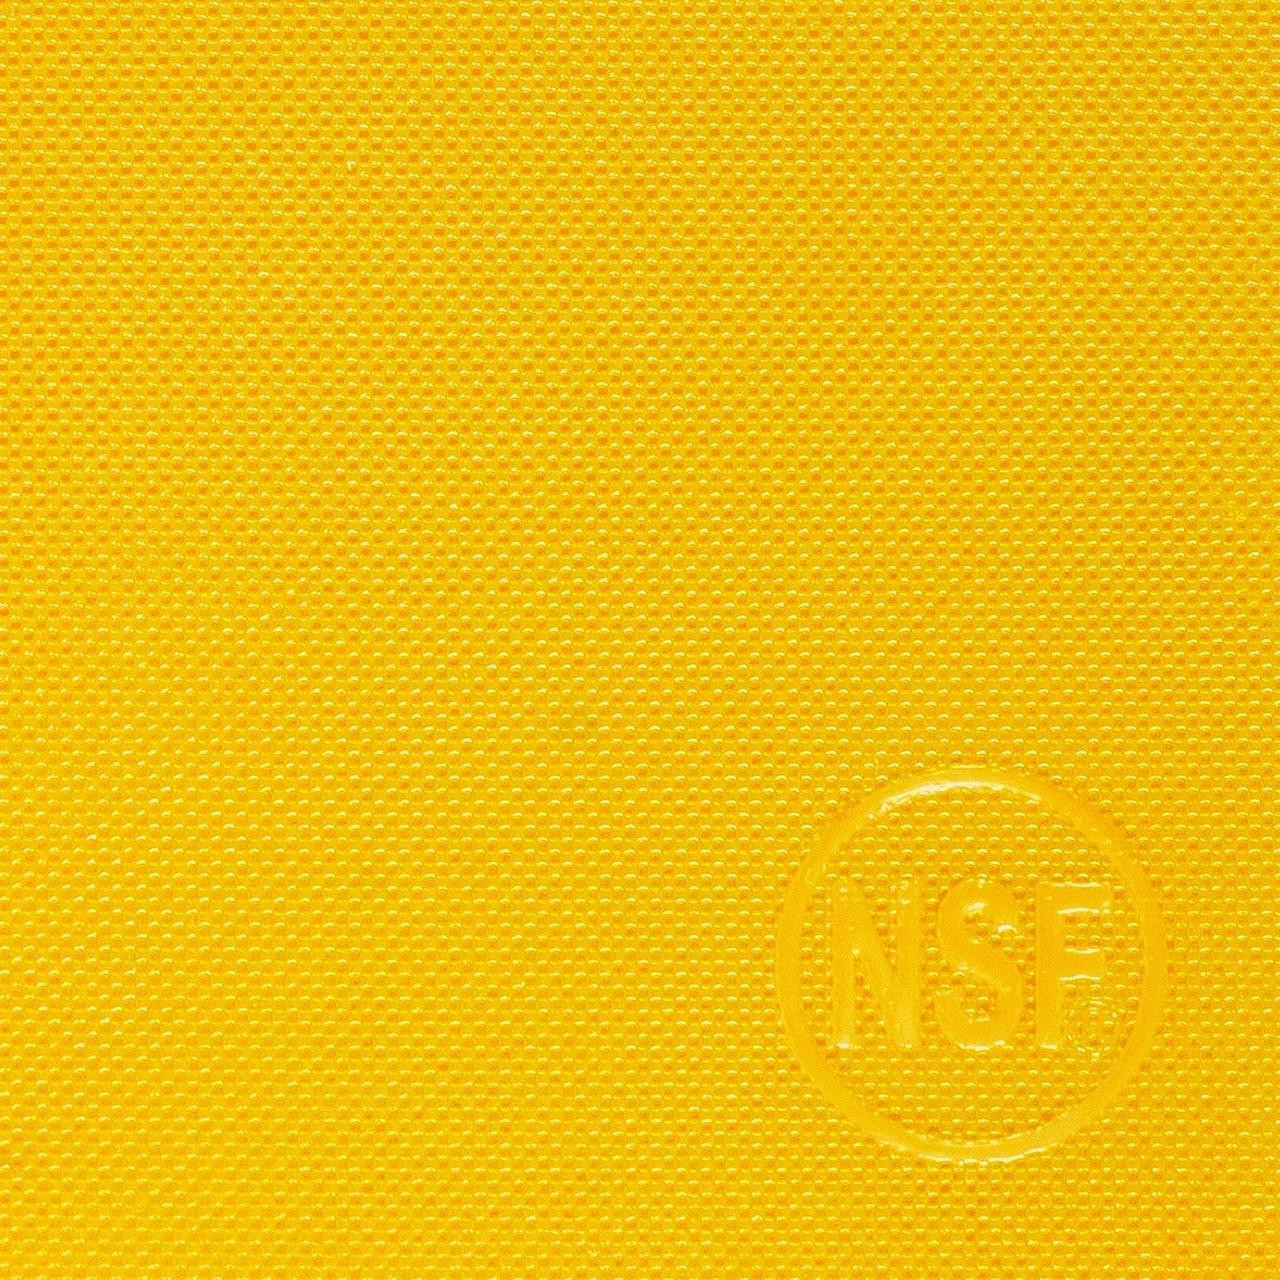 Commercial Yellow Plastic HDPE Cutting Board, NSF Certified - 18 x 24 x 1/2